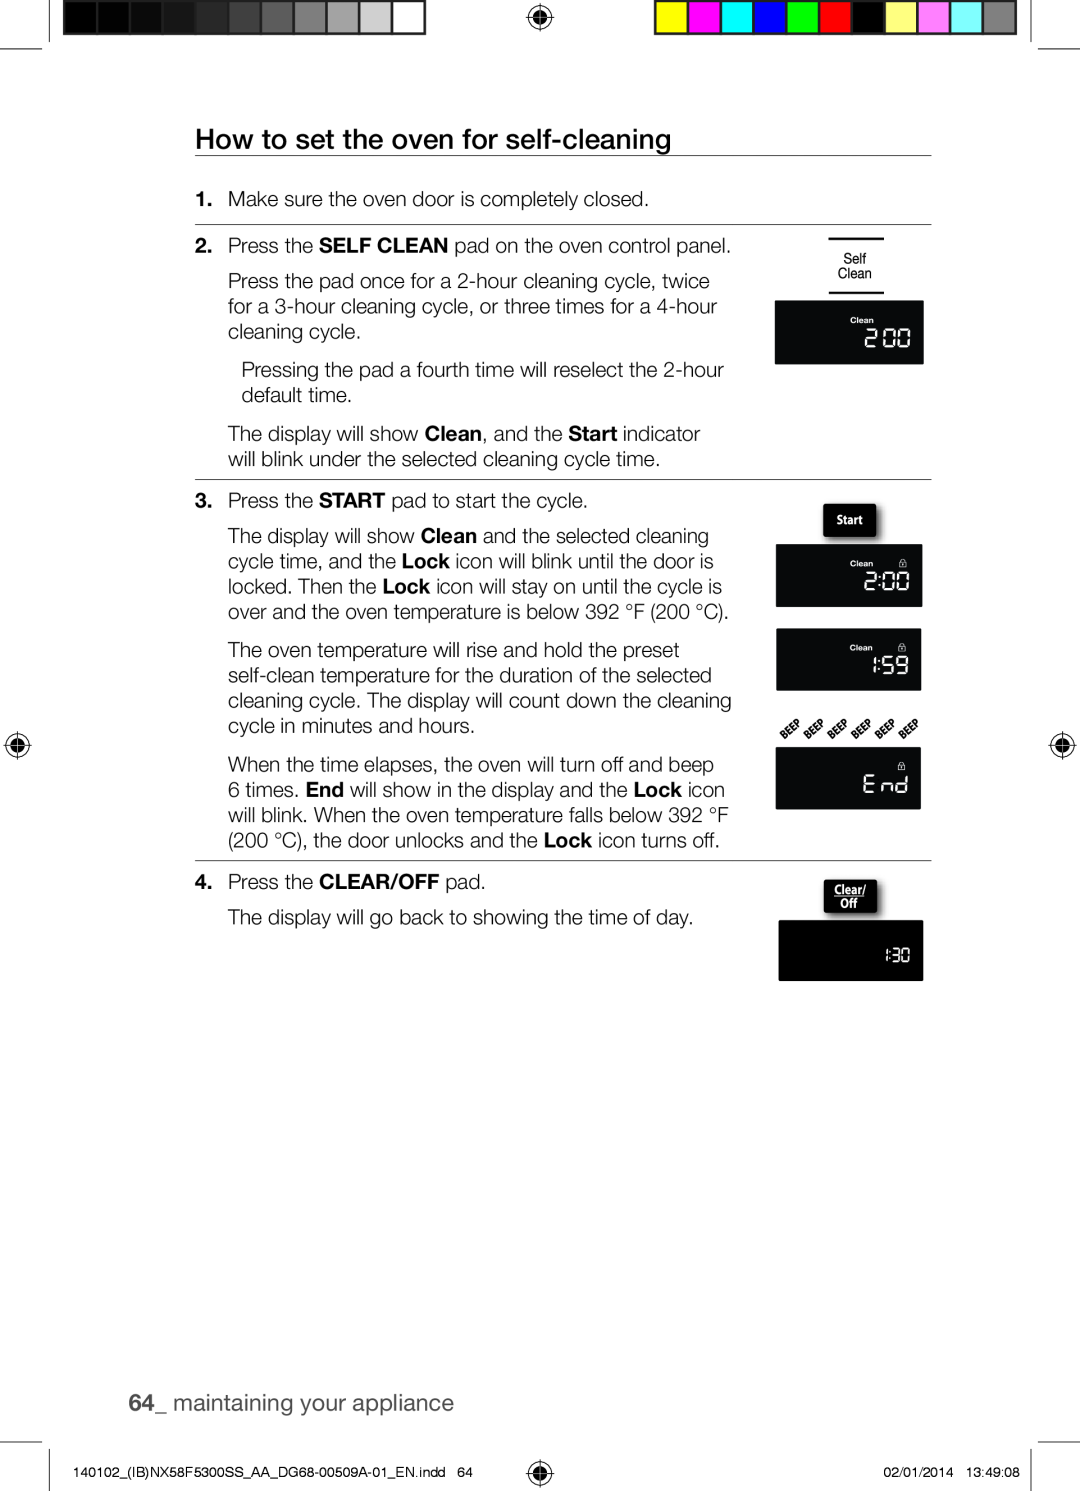 Samsung NX58F5500SW user manual How to set the oven for self-cleaning, maintaining your appliance 